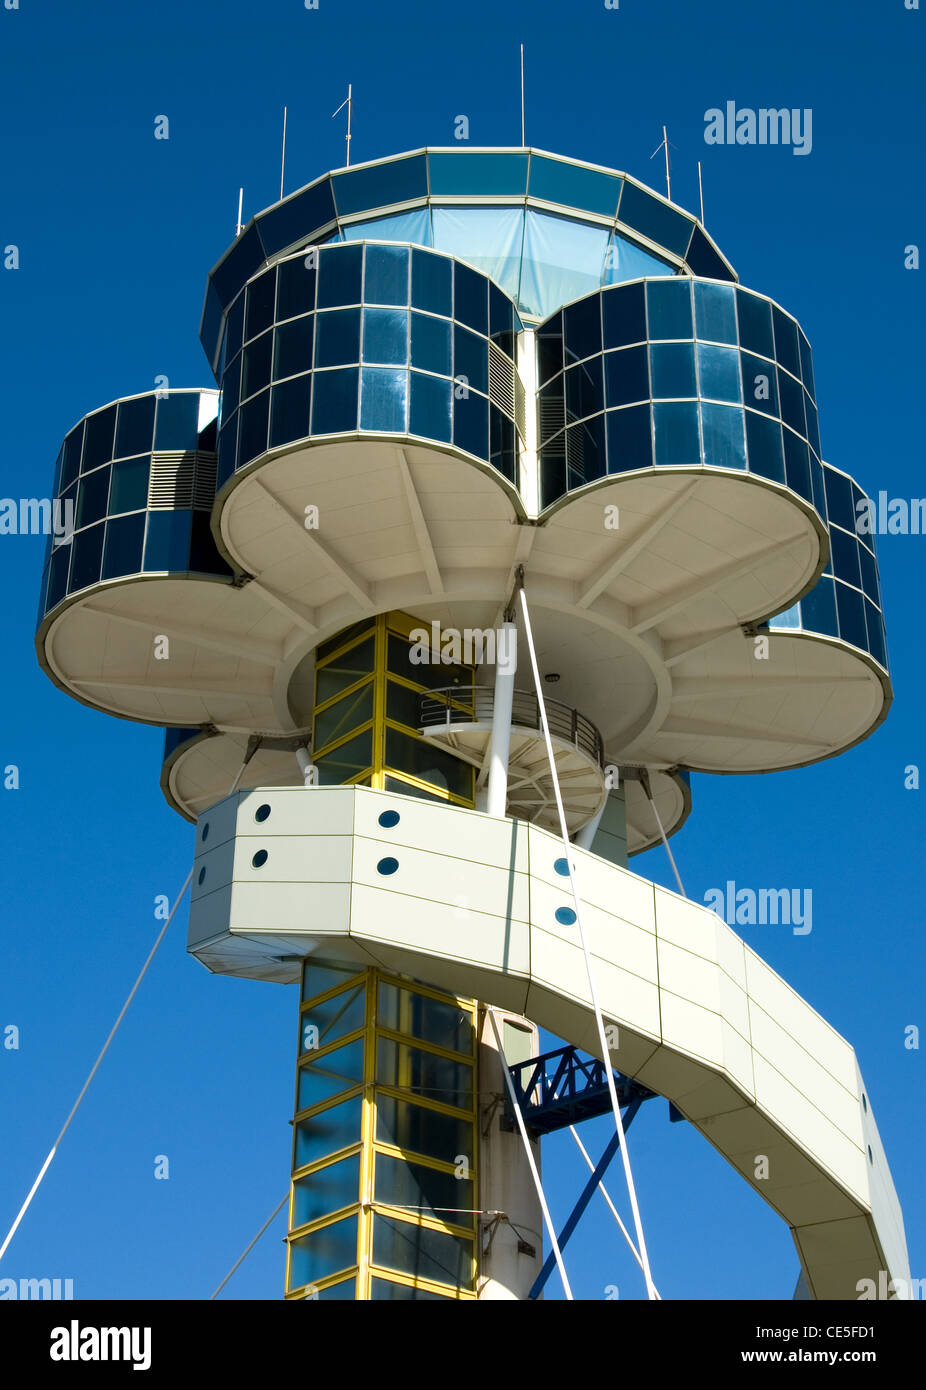 The unusually -shaped control tower at Kingsford-Smith airport, Sydney, New South Wales, Australia Stock Photo